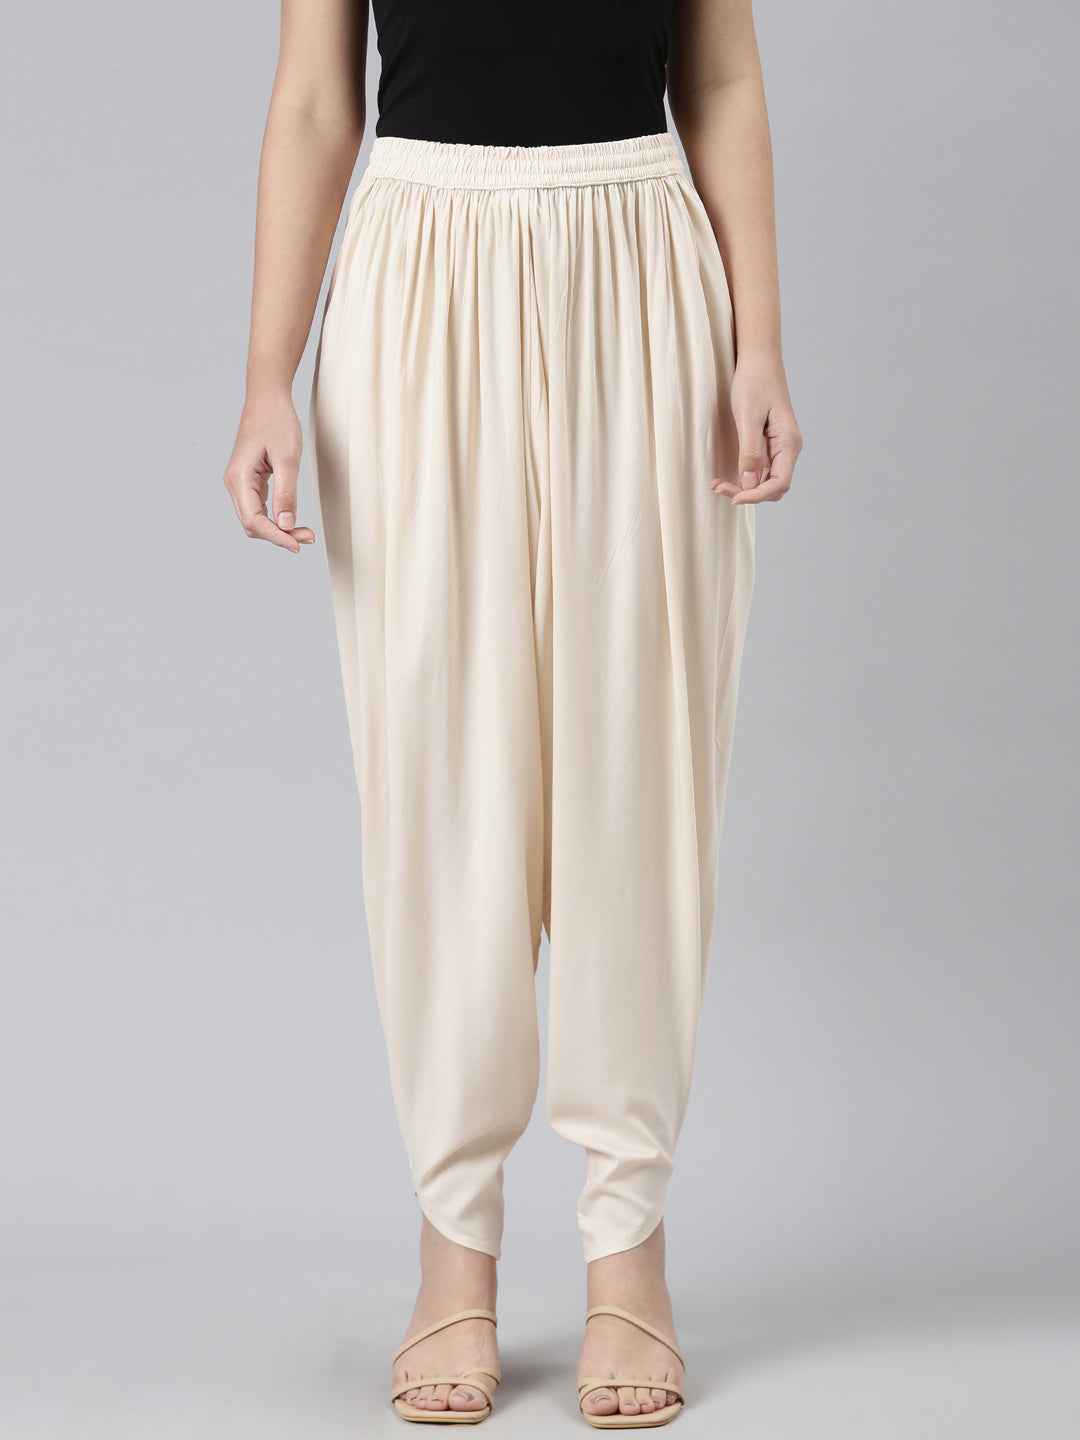 Buy Black Dhoti Pants With Metal Hanging Trim Online - W for Woman